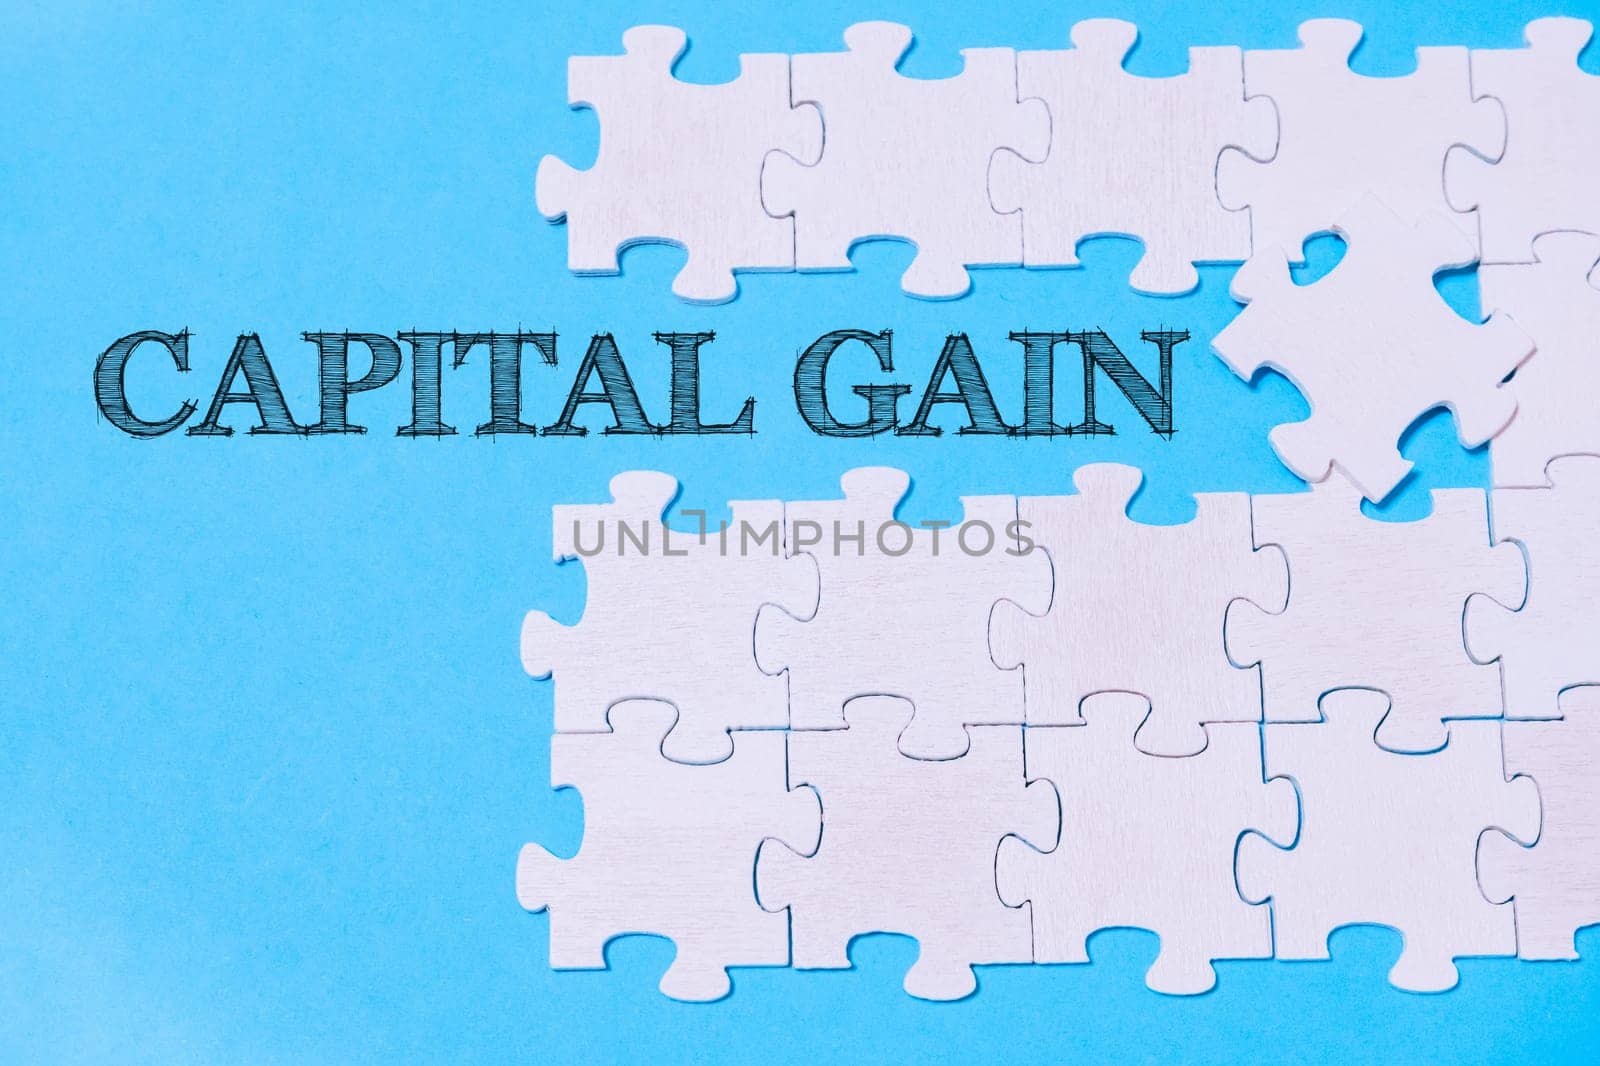 A jigsaw puzzle with the word Capital Gain written on it. The puzzle pieces are scattered across the image, creating a sense of disarray and uncertainty. The blue background adds a sense of calmness